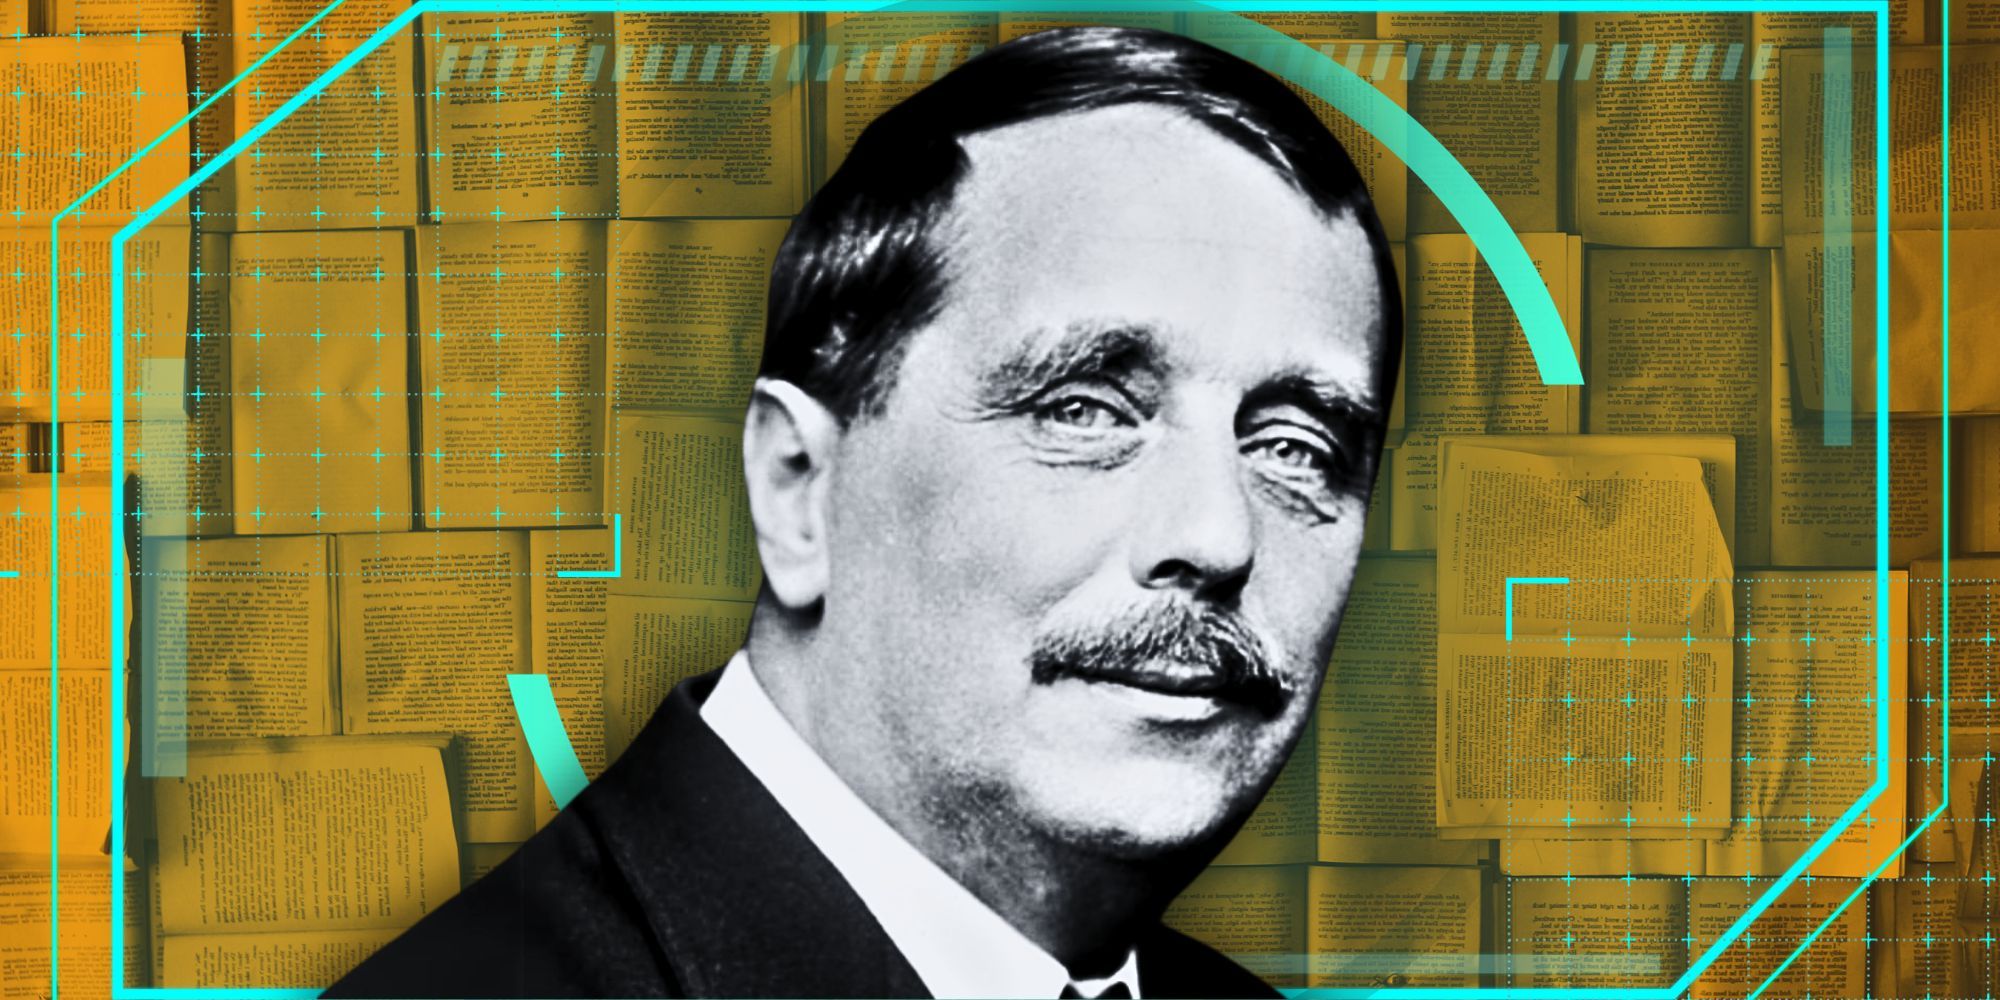 H.G. Wells on a stylized background